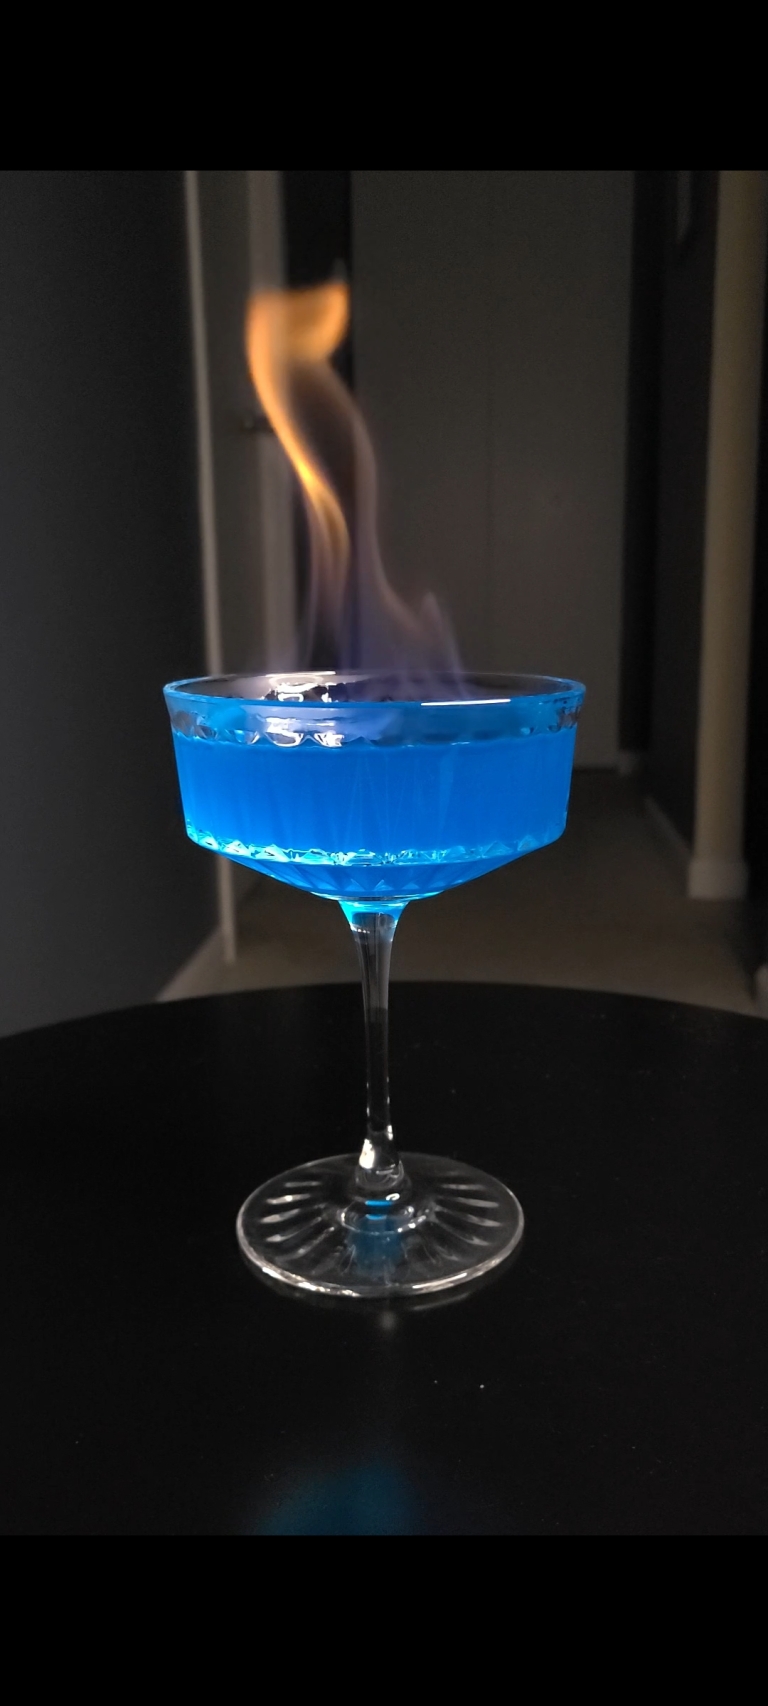 Flames Before Bed drink on black table. The drink is blue and is on fire.